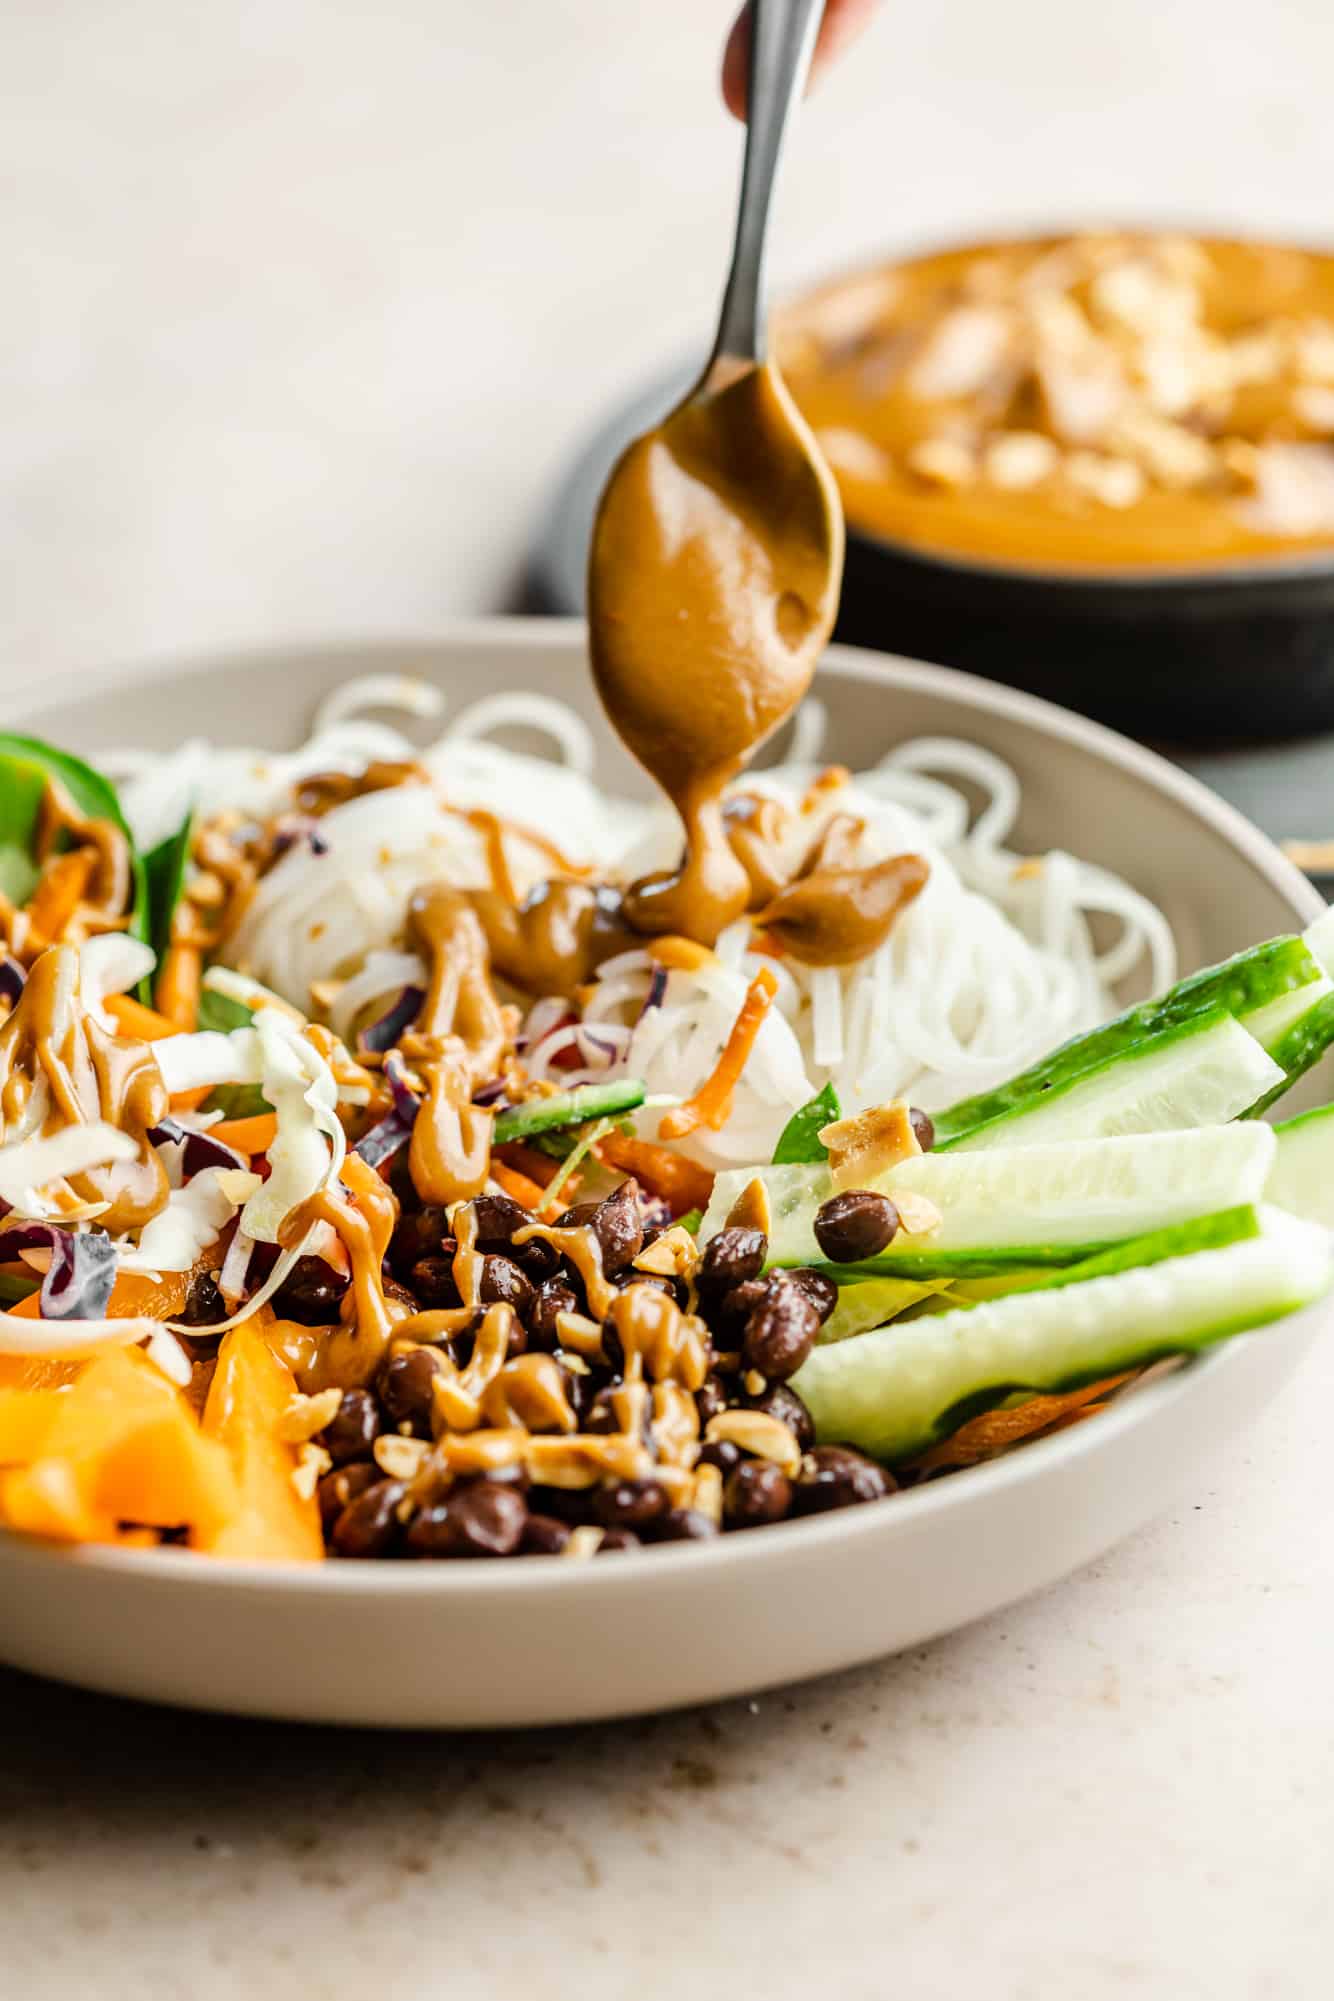 using a spoon to drizzle peanut sauce over a bowl of noodles and vegetables.